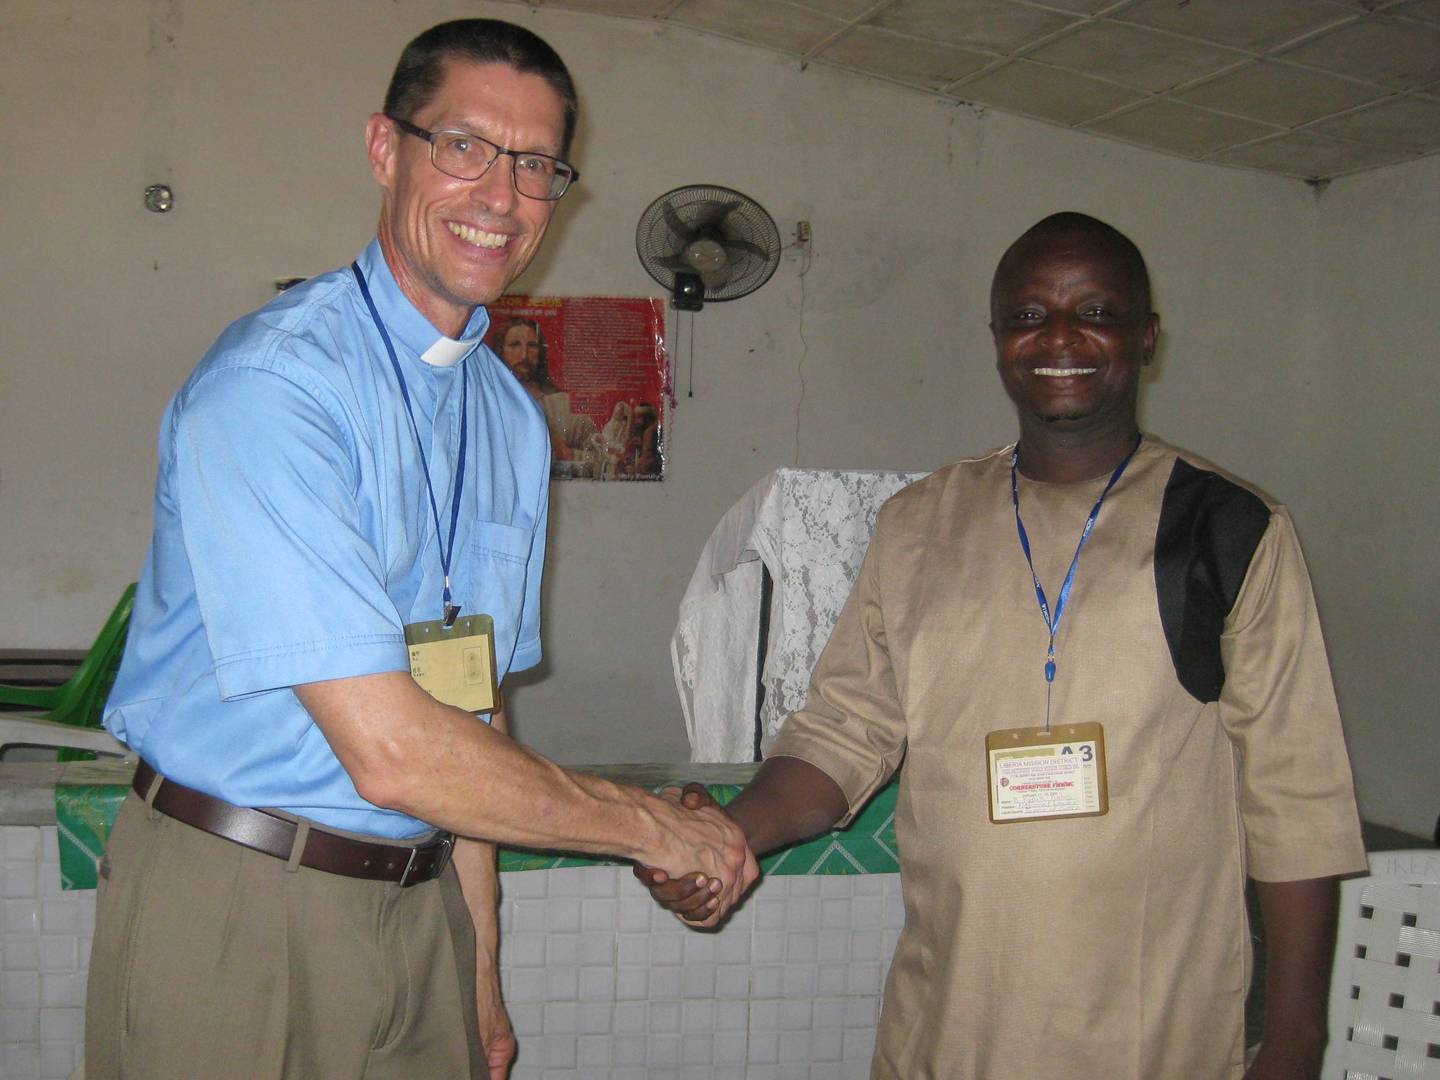 Mike and Rufus Kahn in Liberia